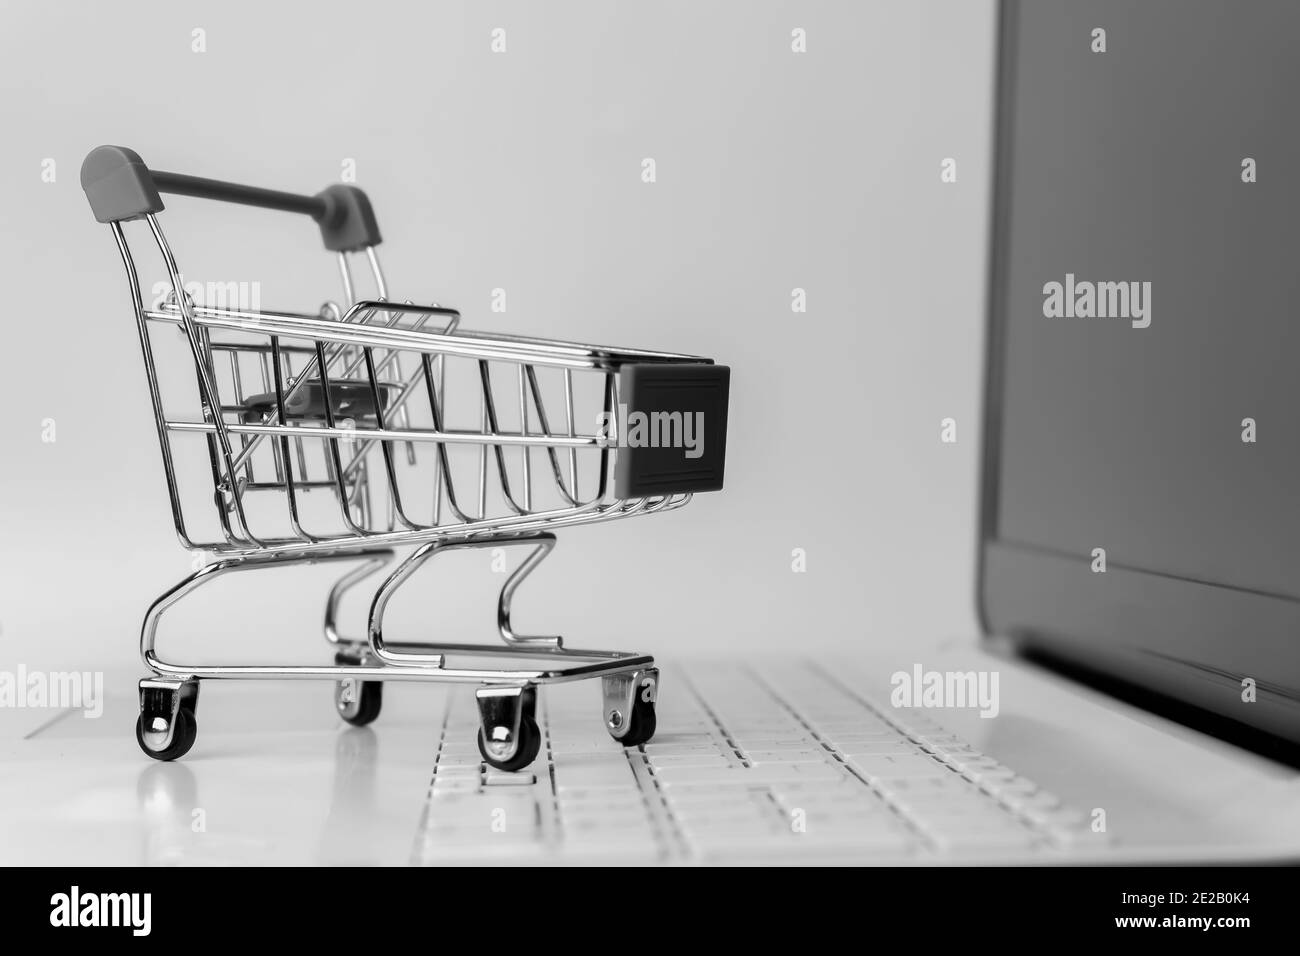 Black and white online shopping concept background. Shopping cart trolley empty on laptop keyboard.E-commerce template mock up with copy space. Stock Photo